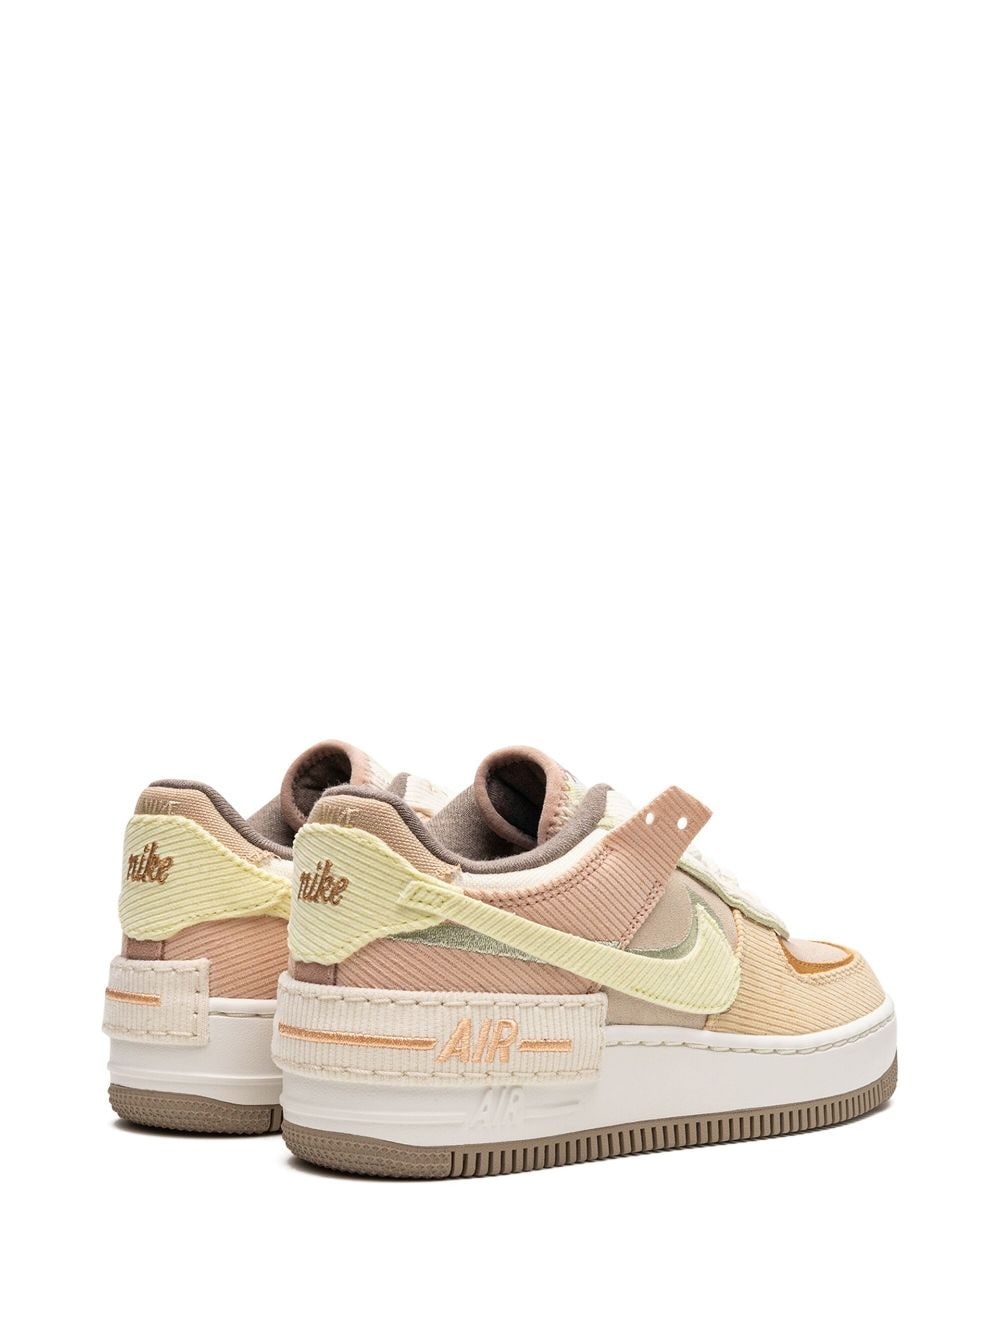 AF1 Shadow "Coconut Milk/Citron Tint" sneakers - 3